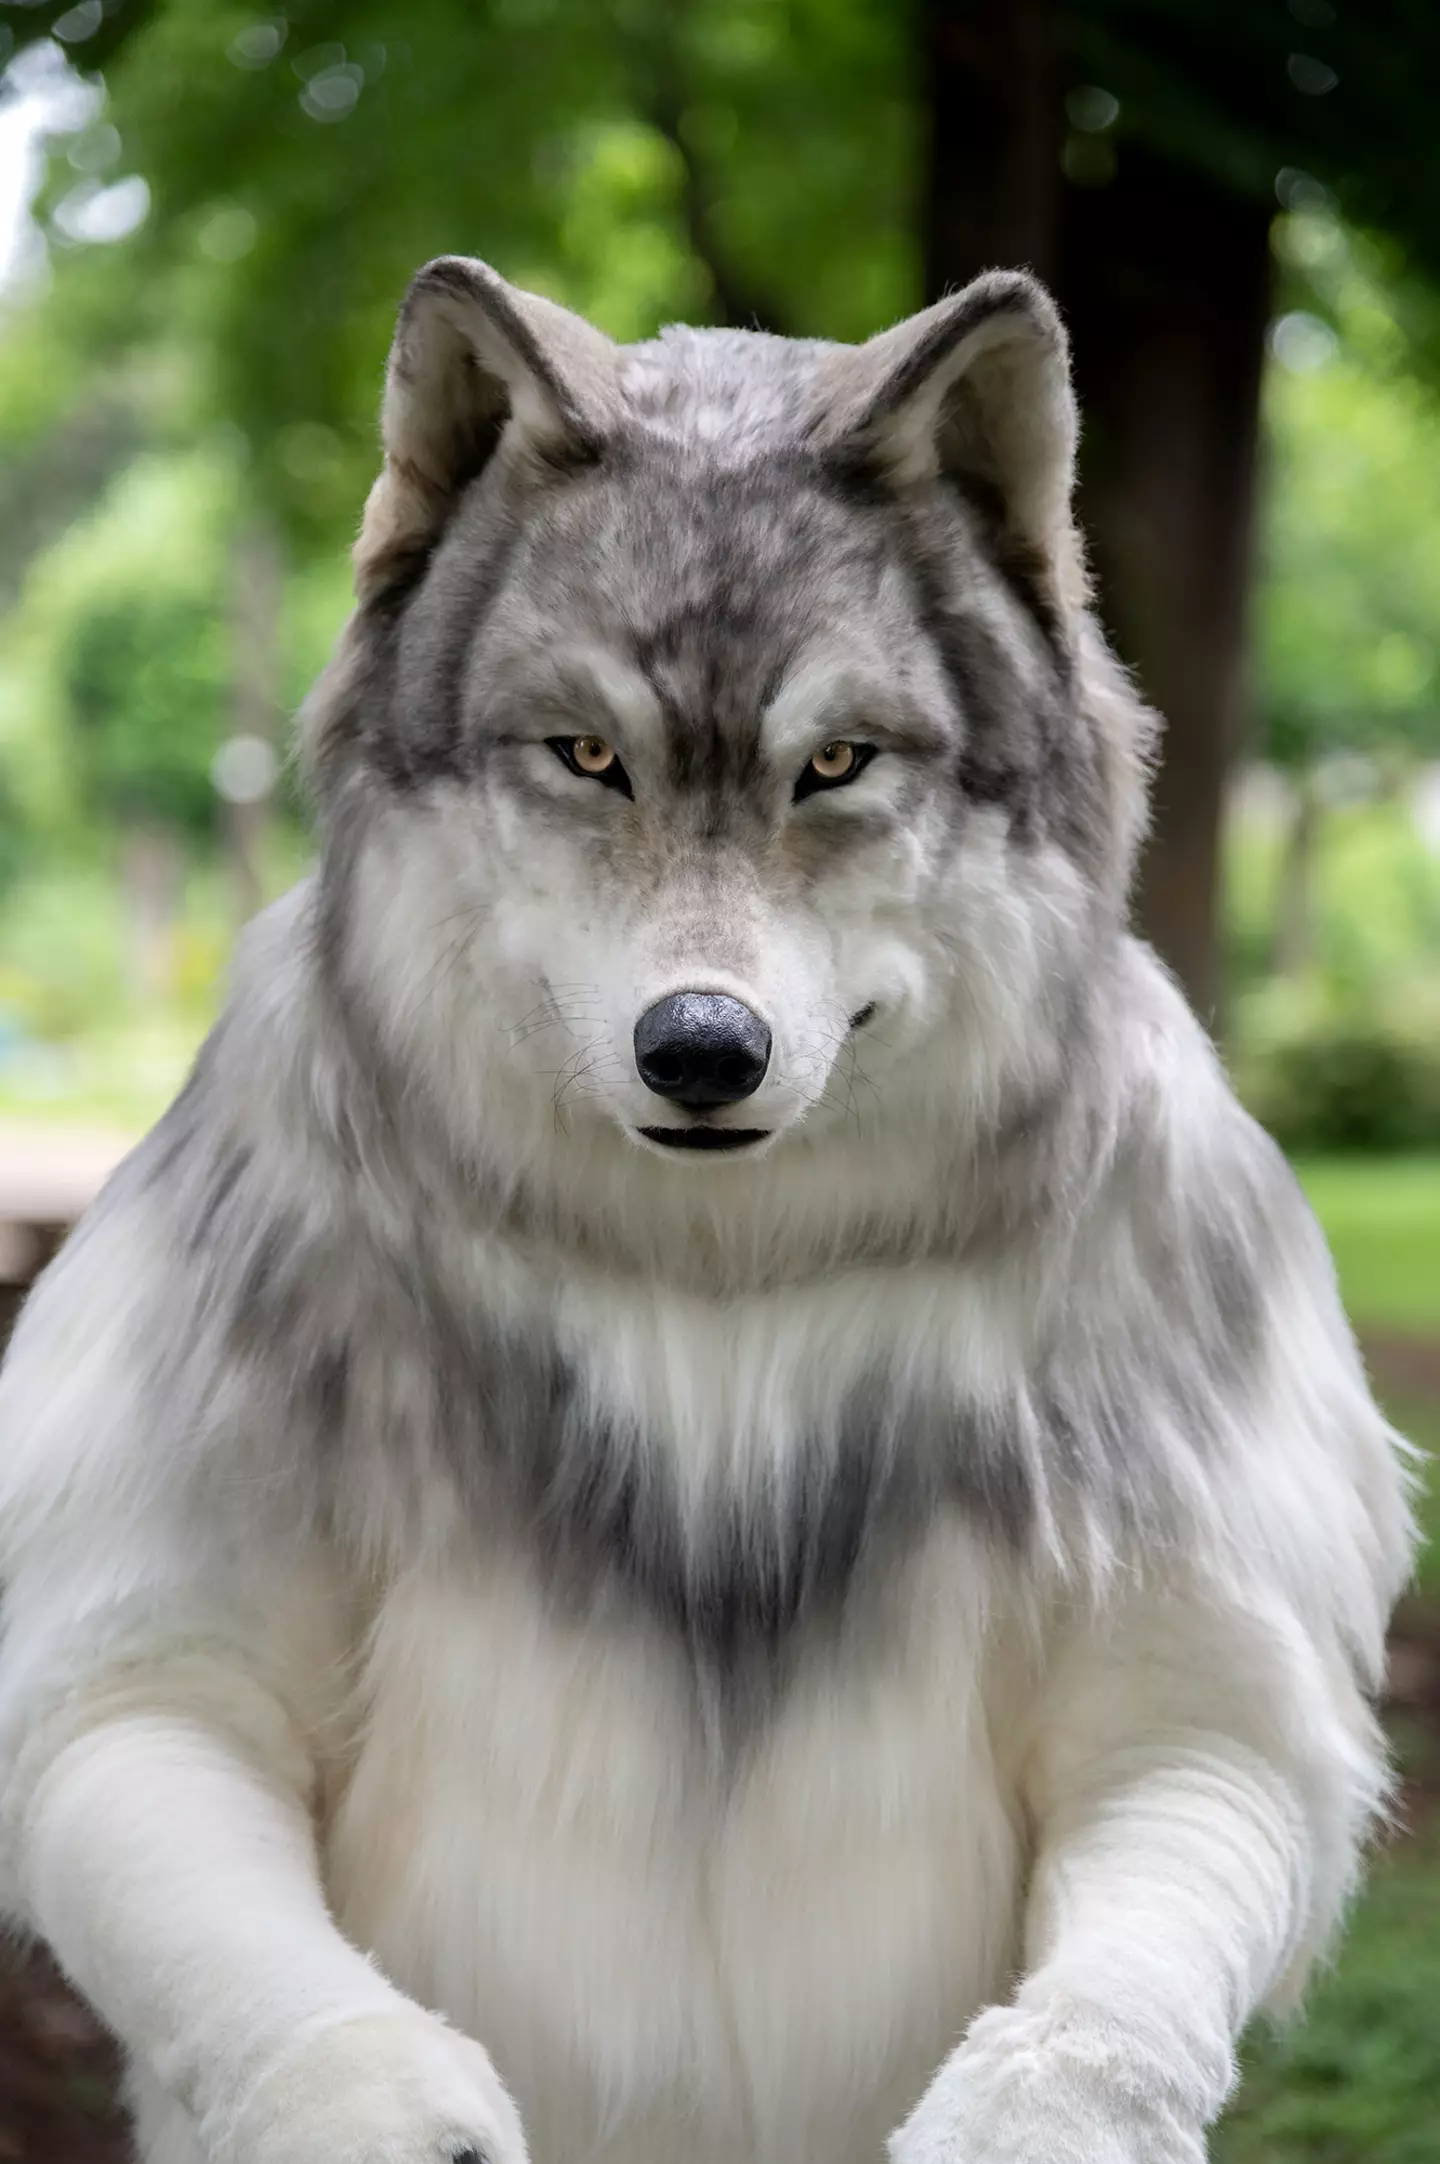 The customer said it was his dream to look like a wolf.